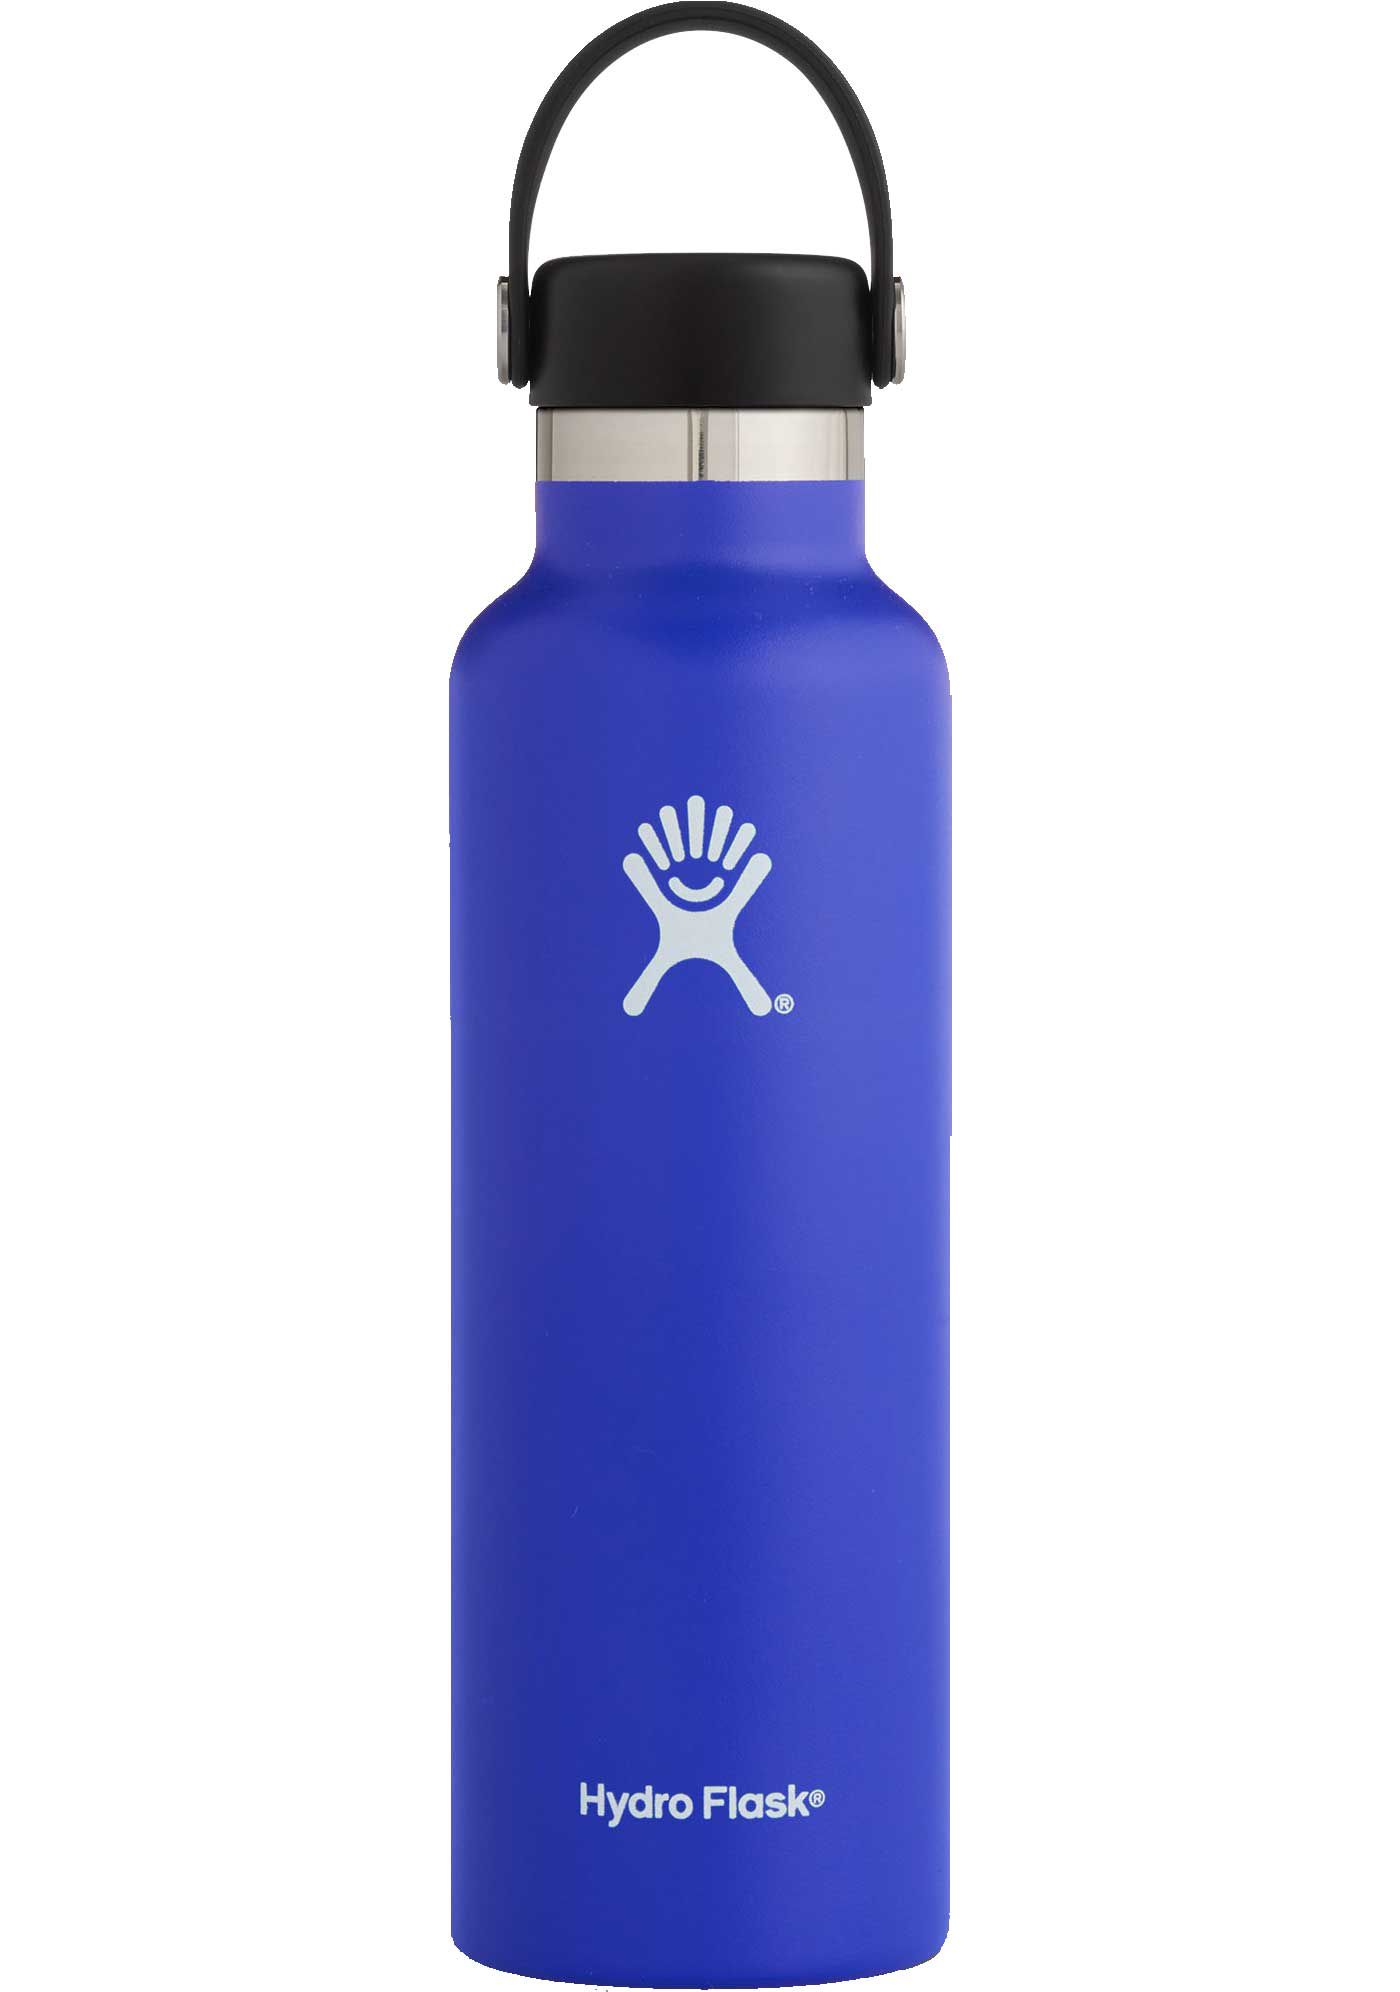 Download Hydro Flask Standard Mouth 21 oz. Bottle with Flex Cap ...